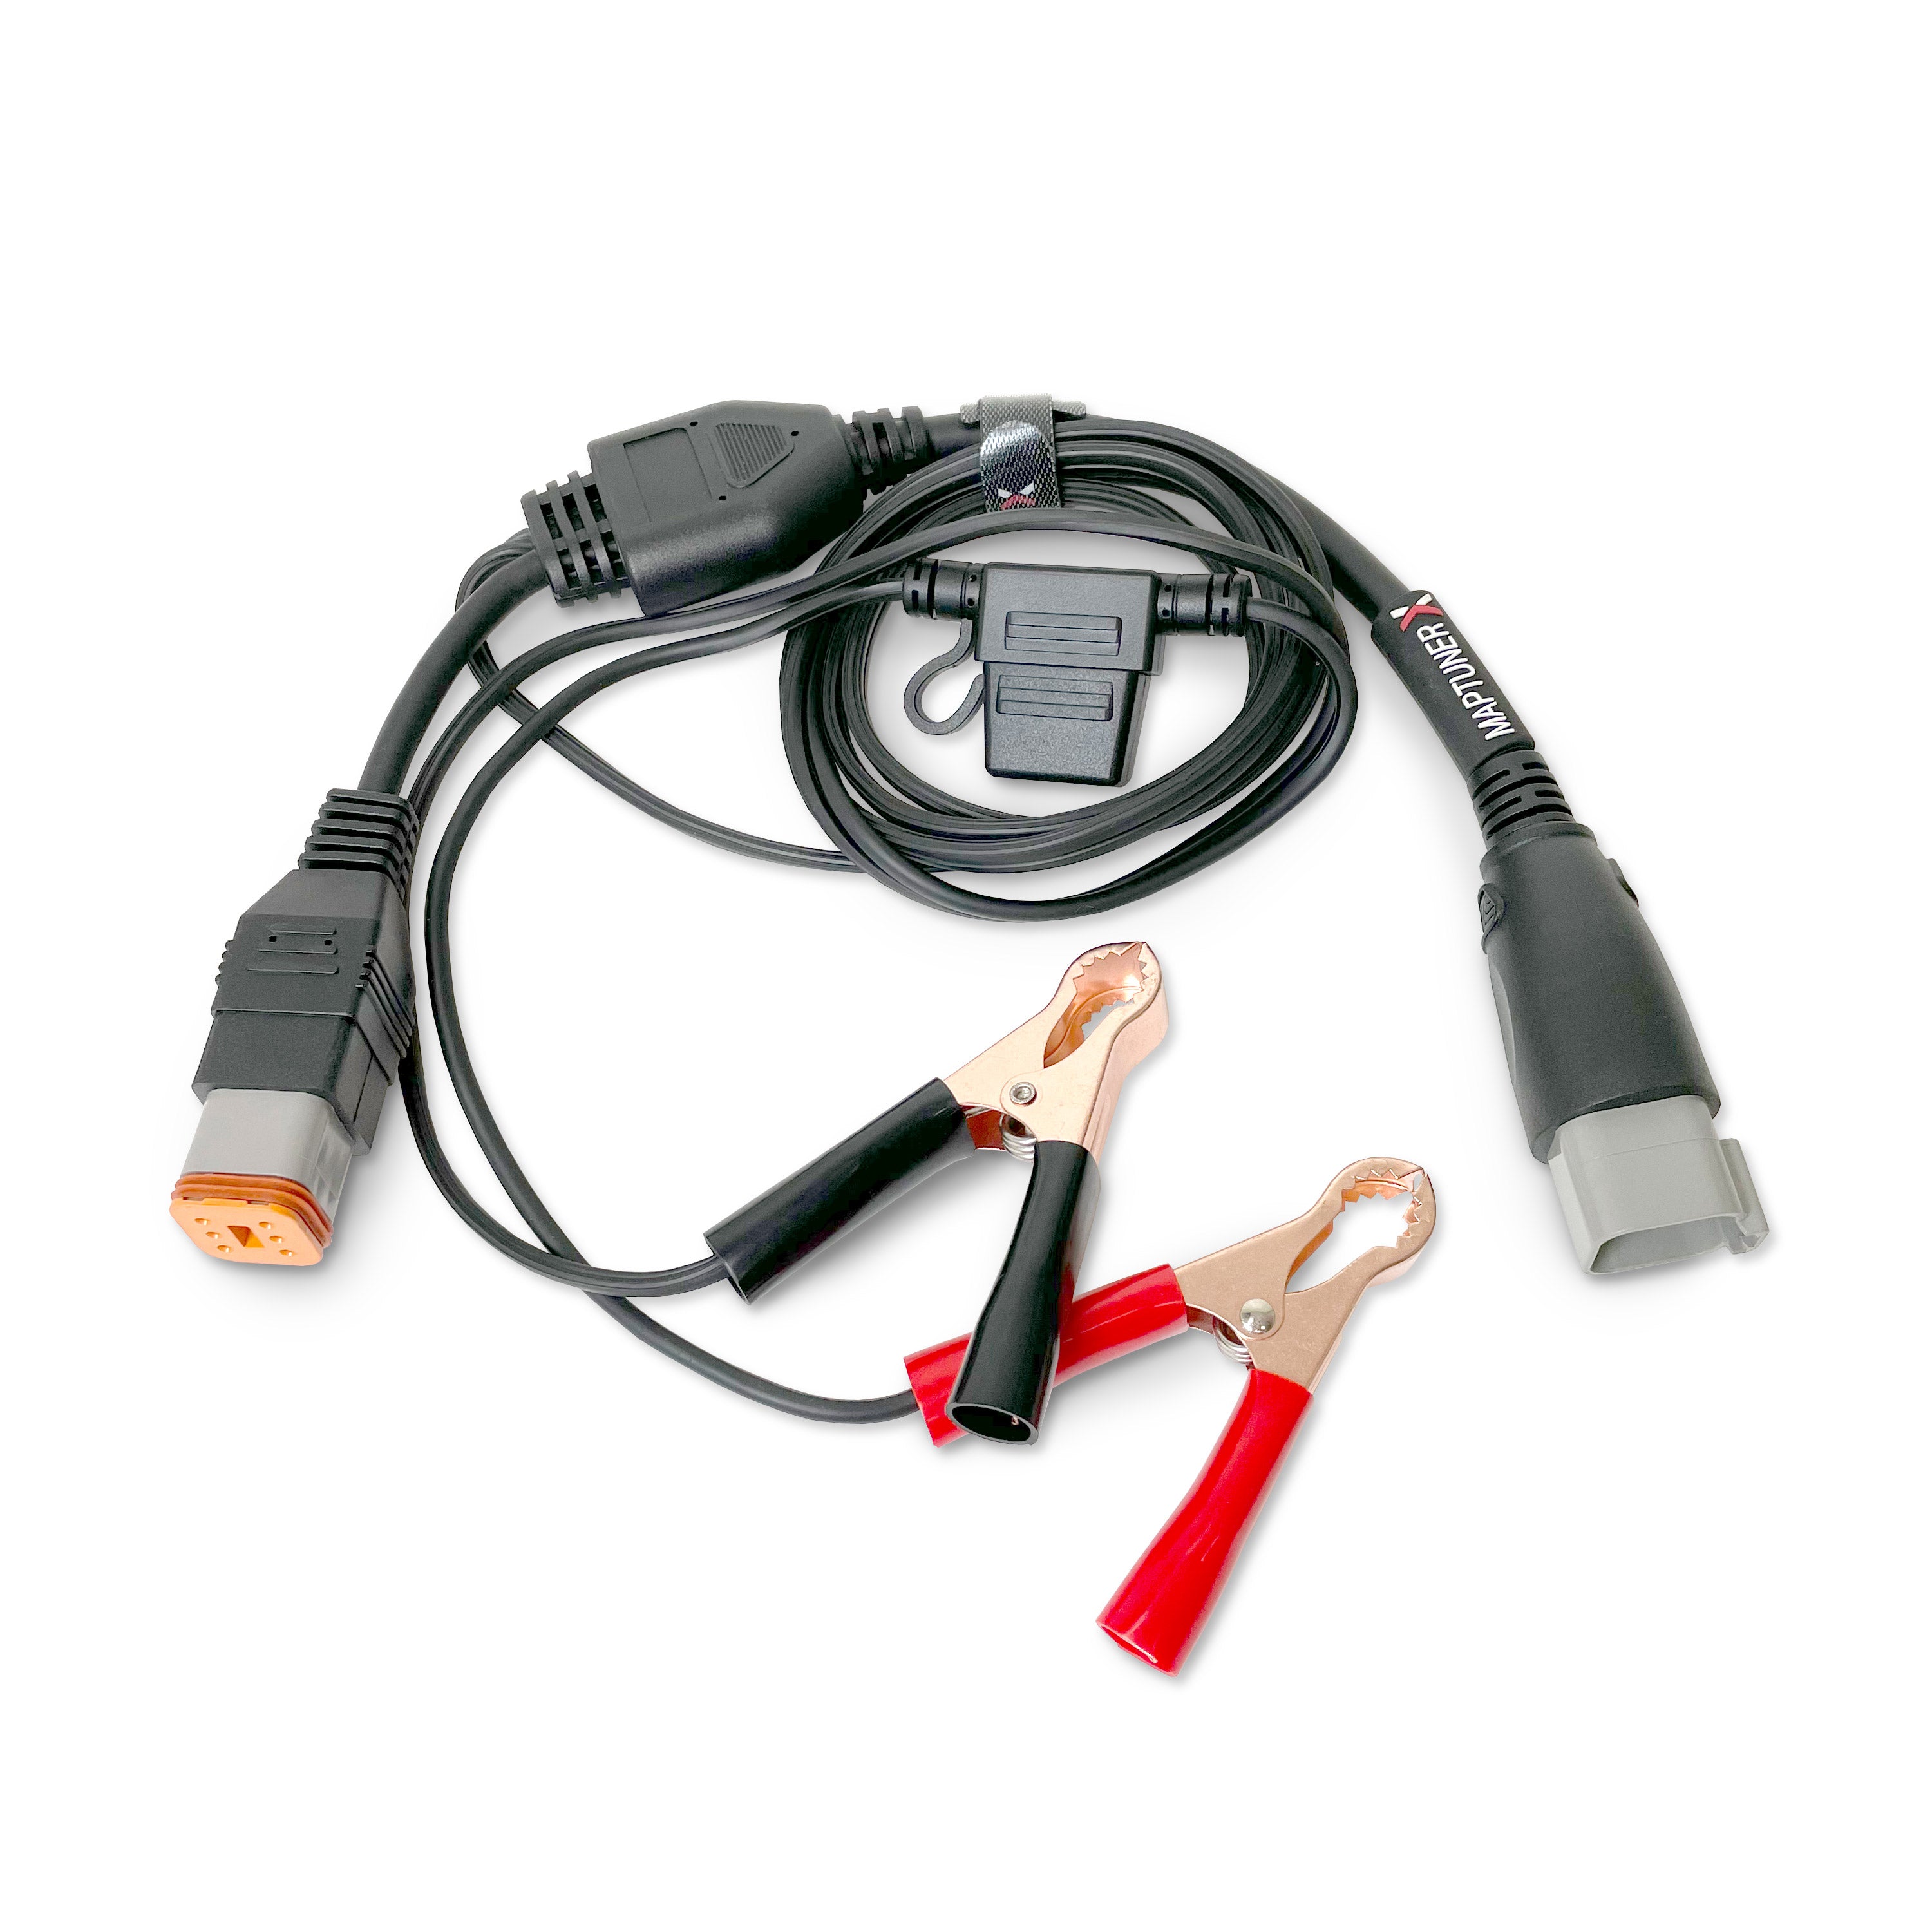 Ski-Doo Bypass Diagnostic/Programming Cable (2-Stroke Models)